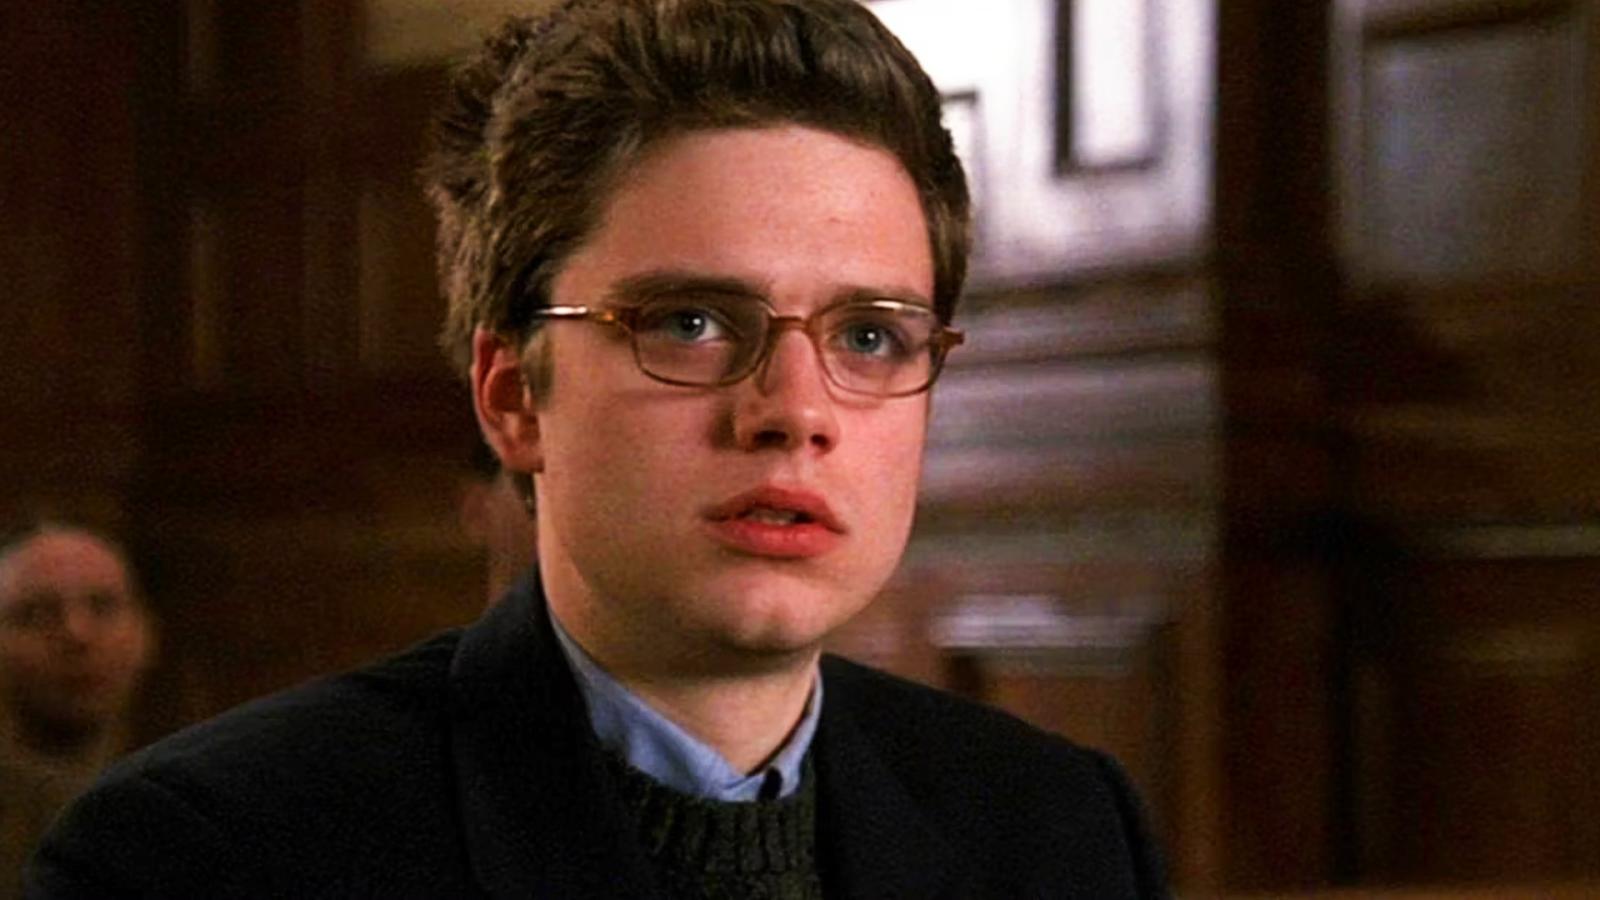 3 Biggest Marvel Stars You Totally Forgot Starred in Law & Order: SVU - image 2